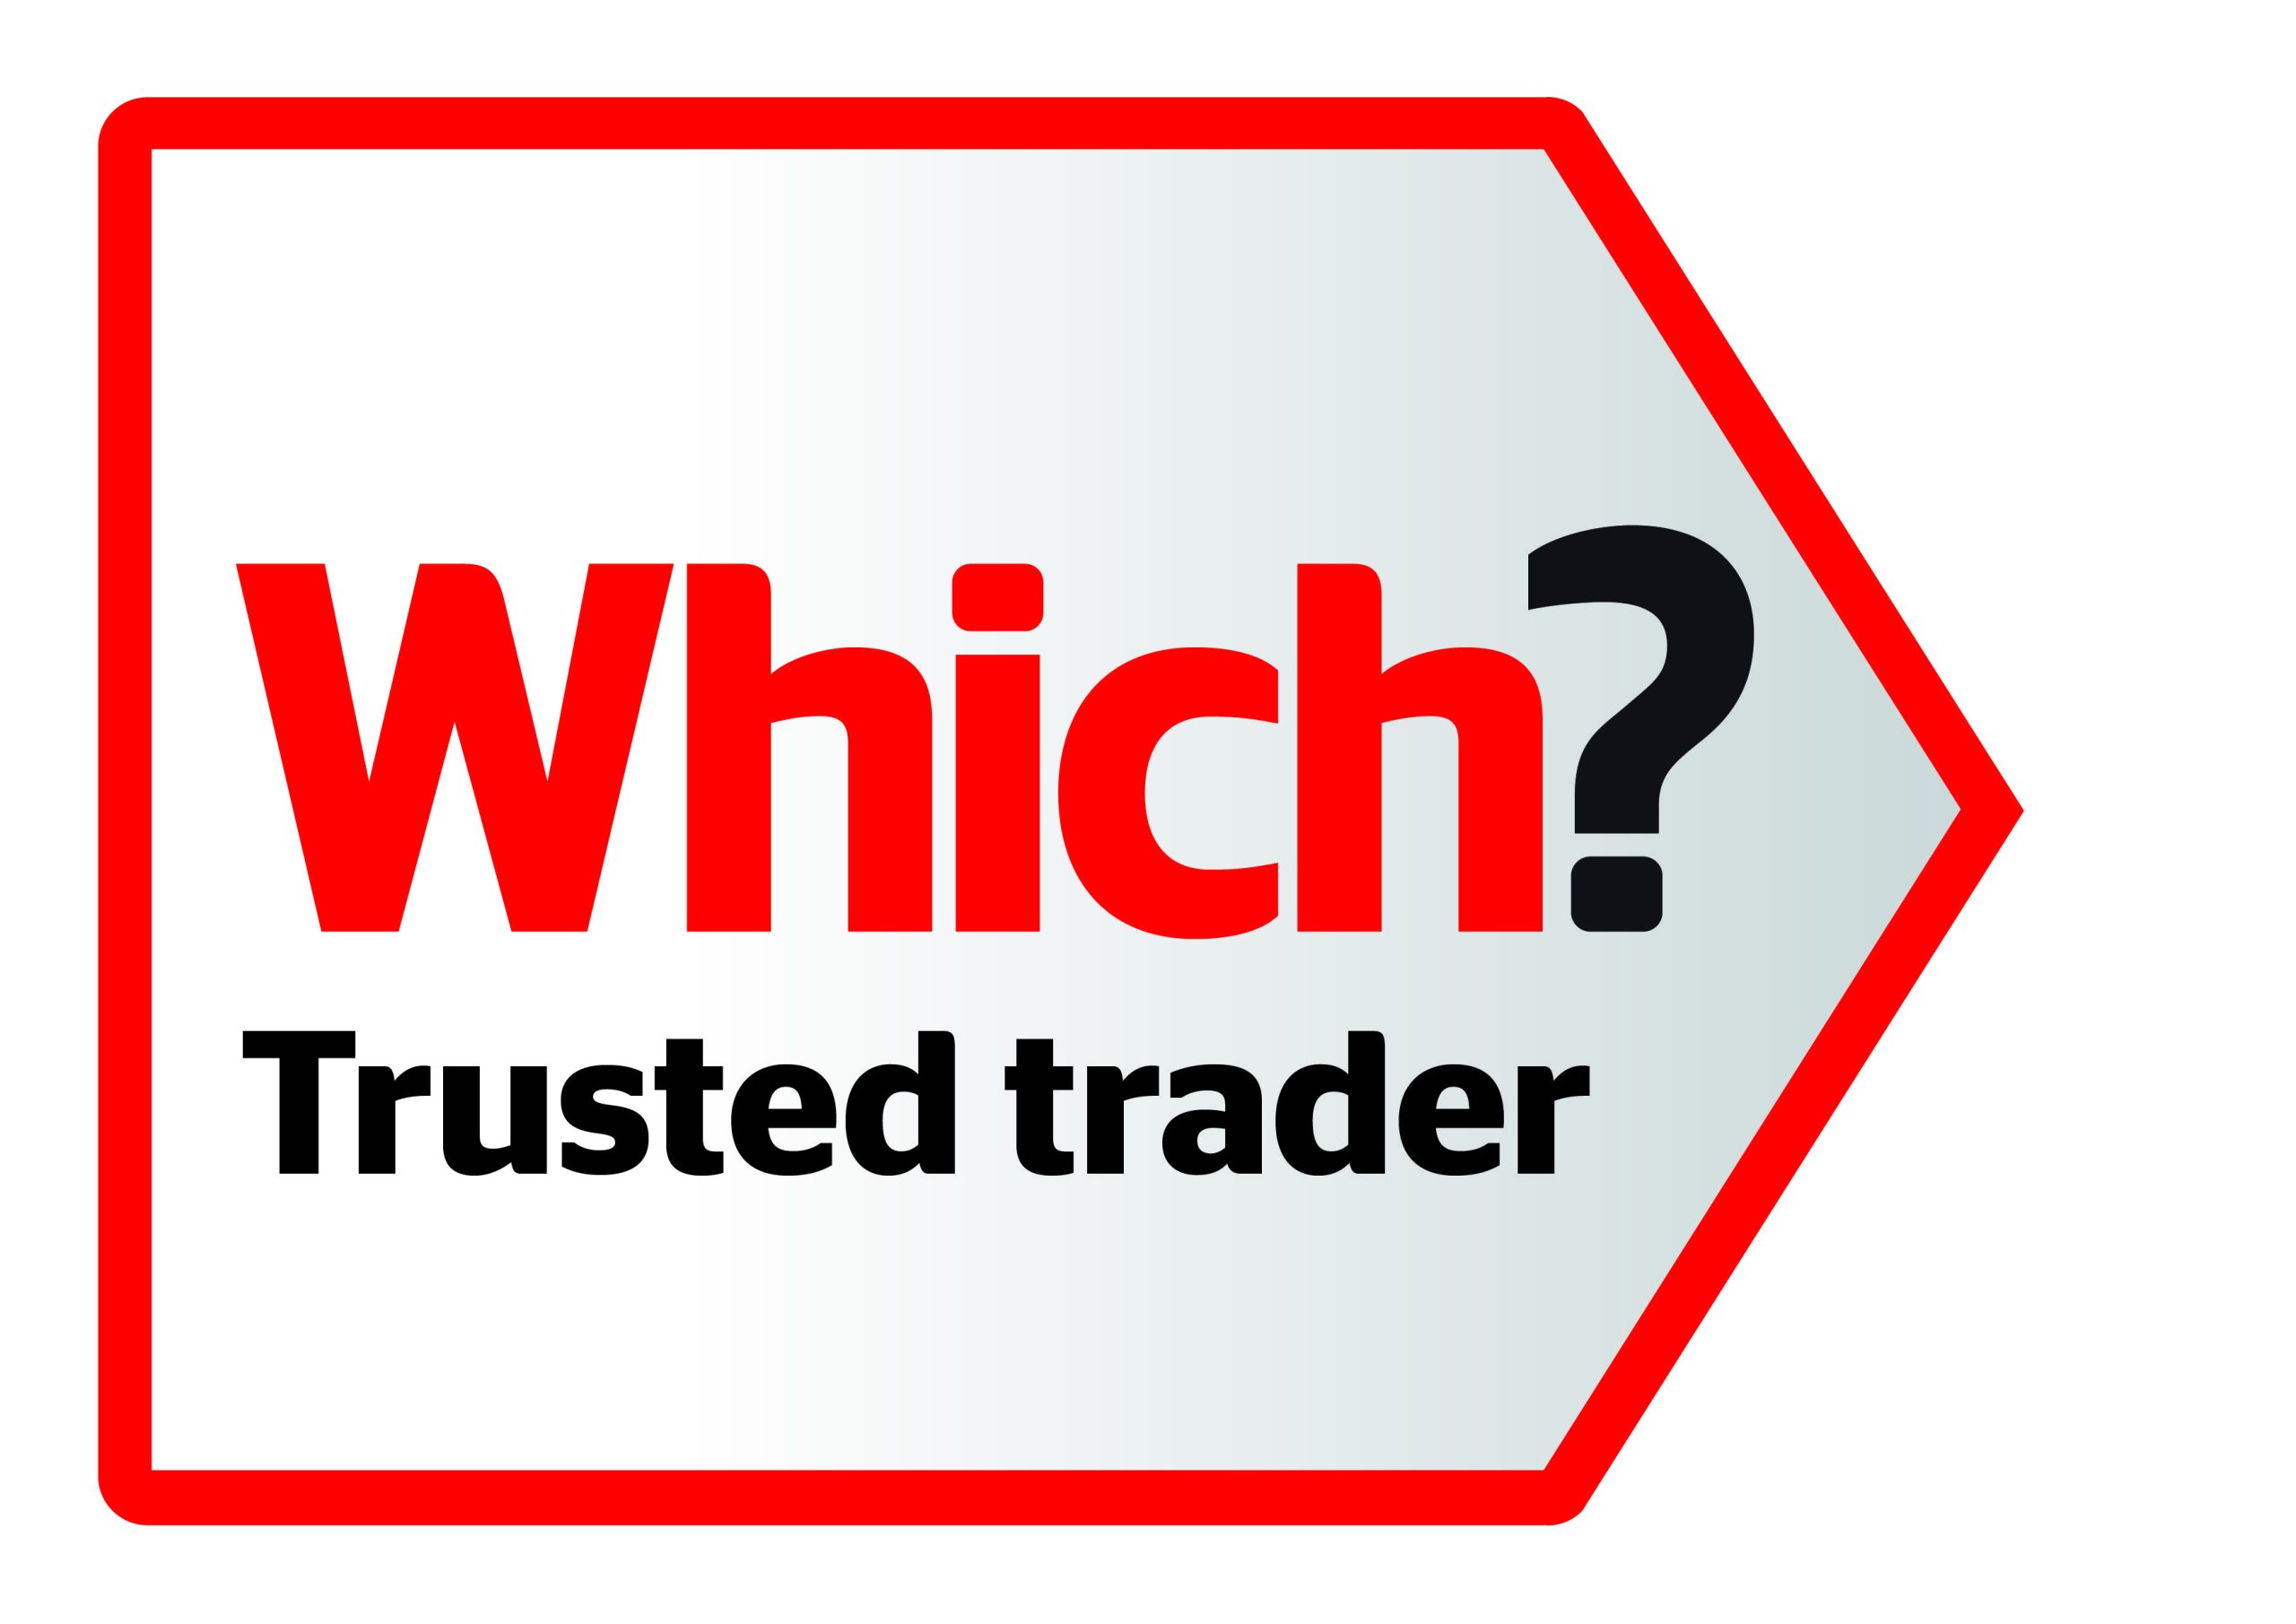 2015 - Bestowed with the Which Trusted Trader Accolade